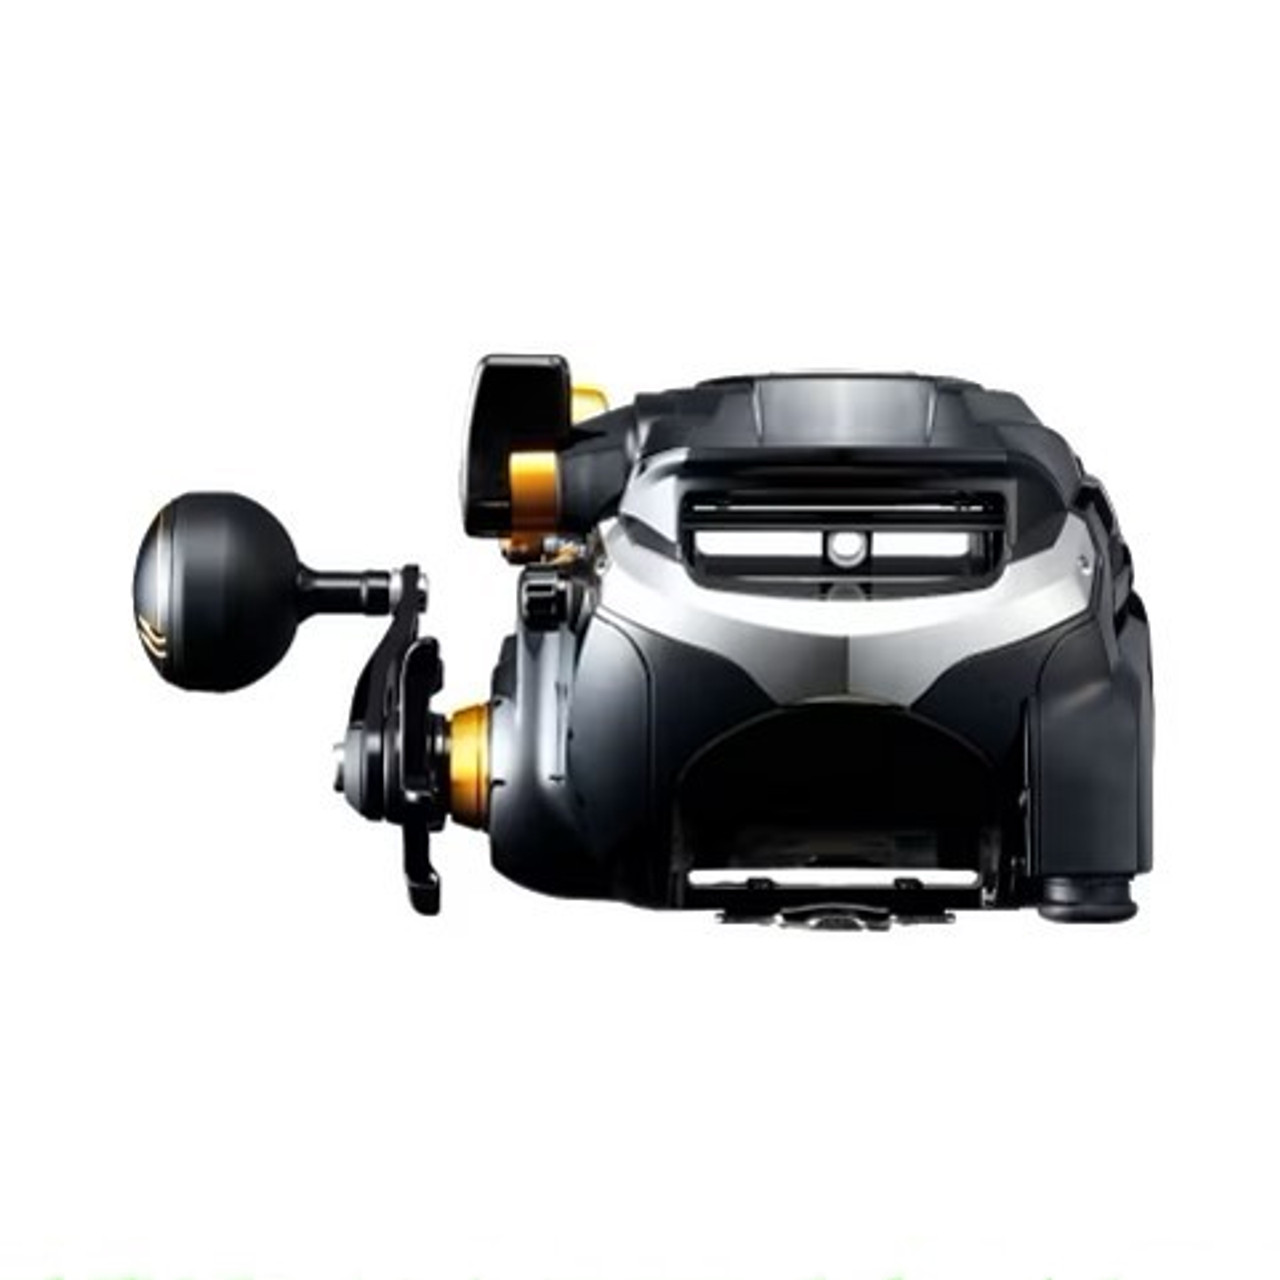 We have the New Shimano Beastmaster 9000B electric reel in stock! Visit:  www.meltontackle.com today to take a look at this beauty! #fis